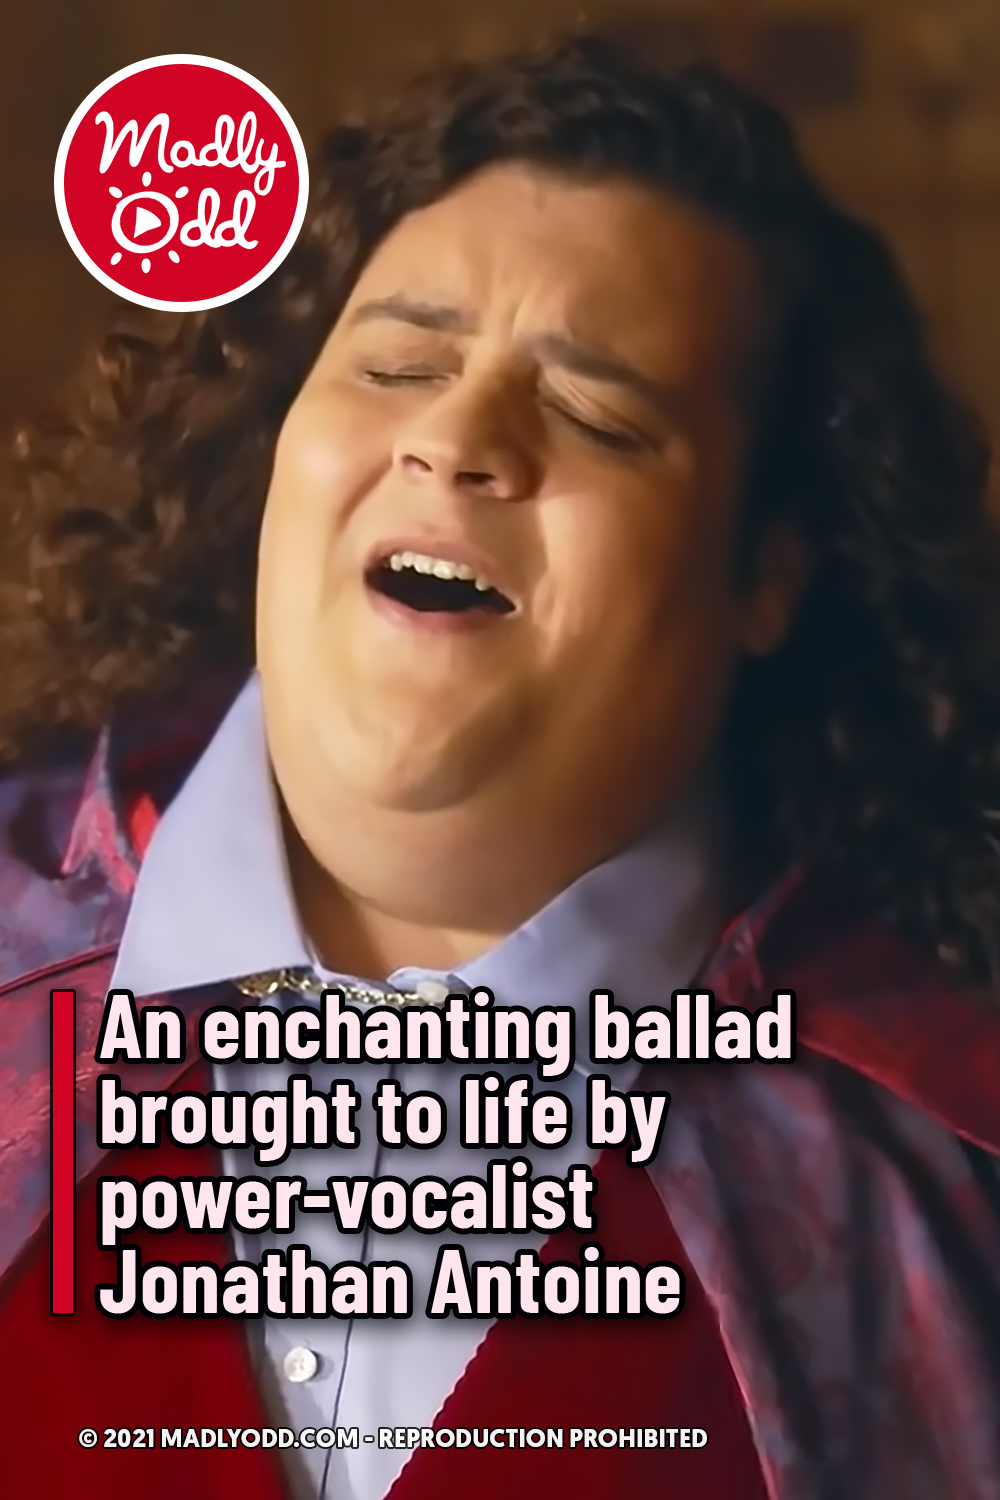 An enchanting ballad brought to life by power-vocalist Jonathan Antoine